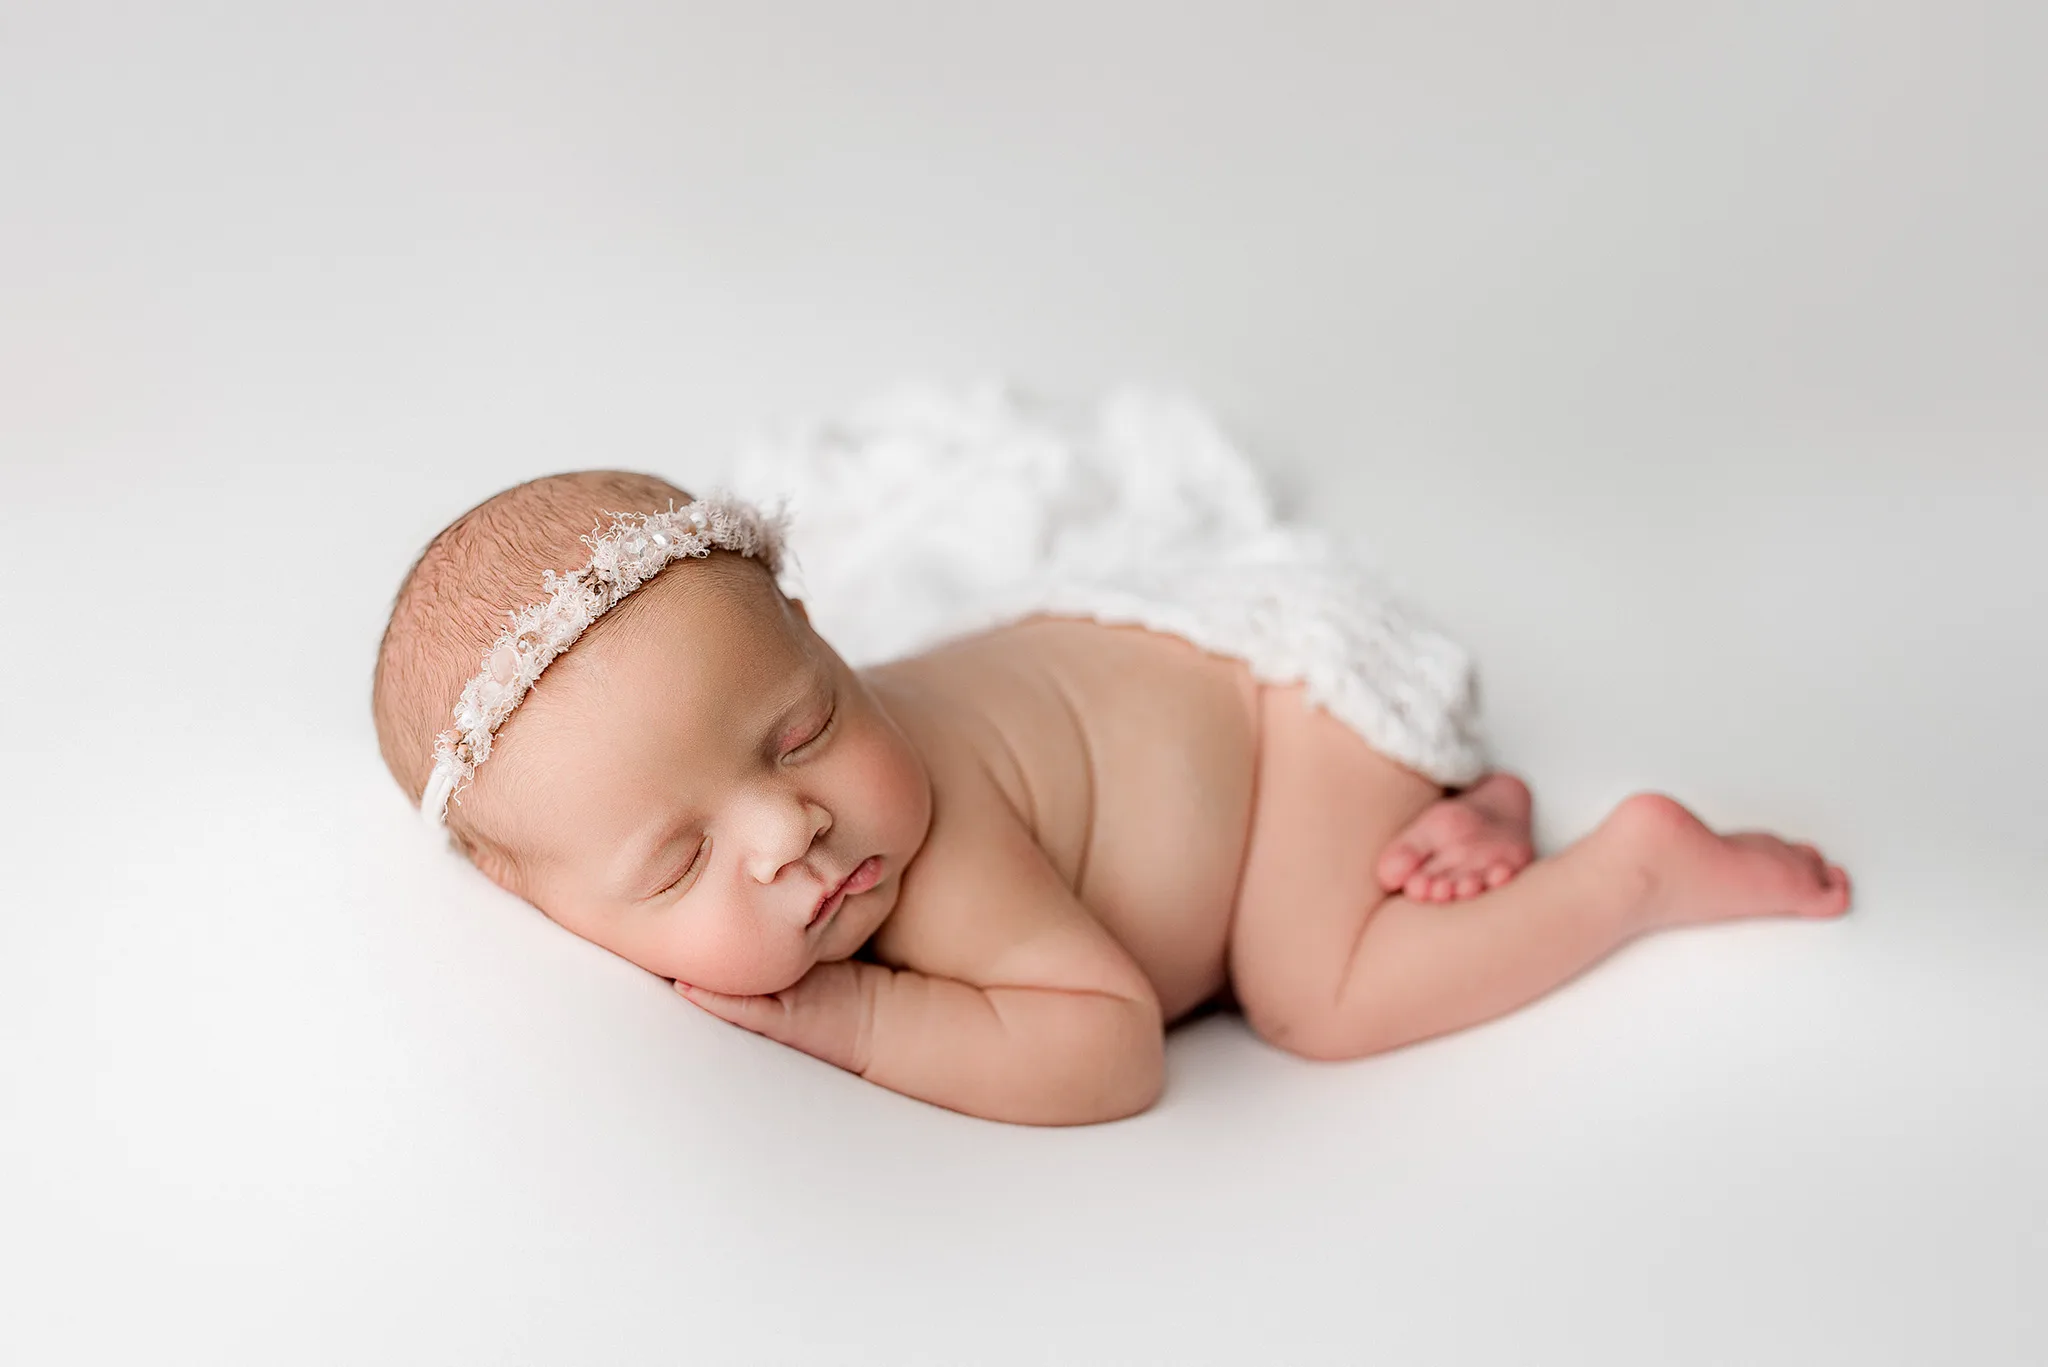 new born photography atlanta, baby portraits atlanta, baby photographer atlanta, baby girl posed on simple studio backdrop, atlanta photographer with props, simple and timeless newborn photography